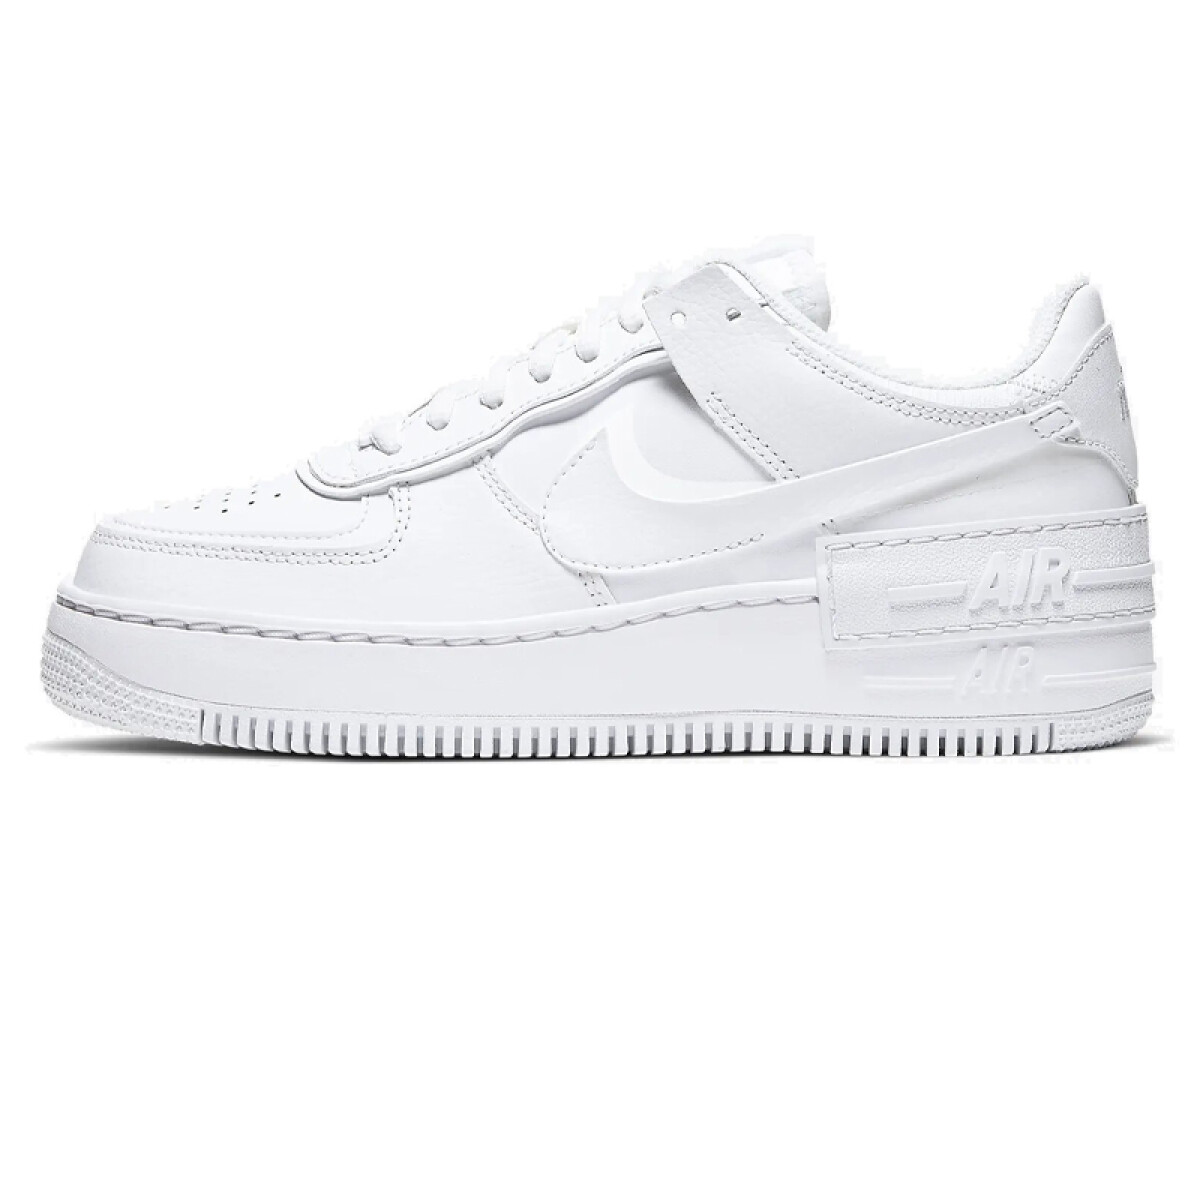 NIKE AIR FORCE 1 DOUBLE VISION 